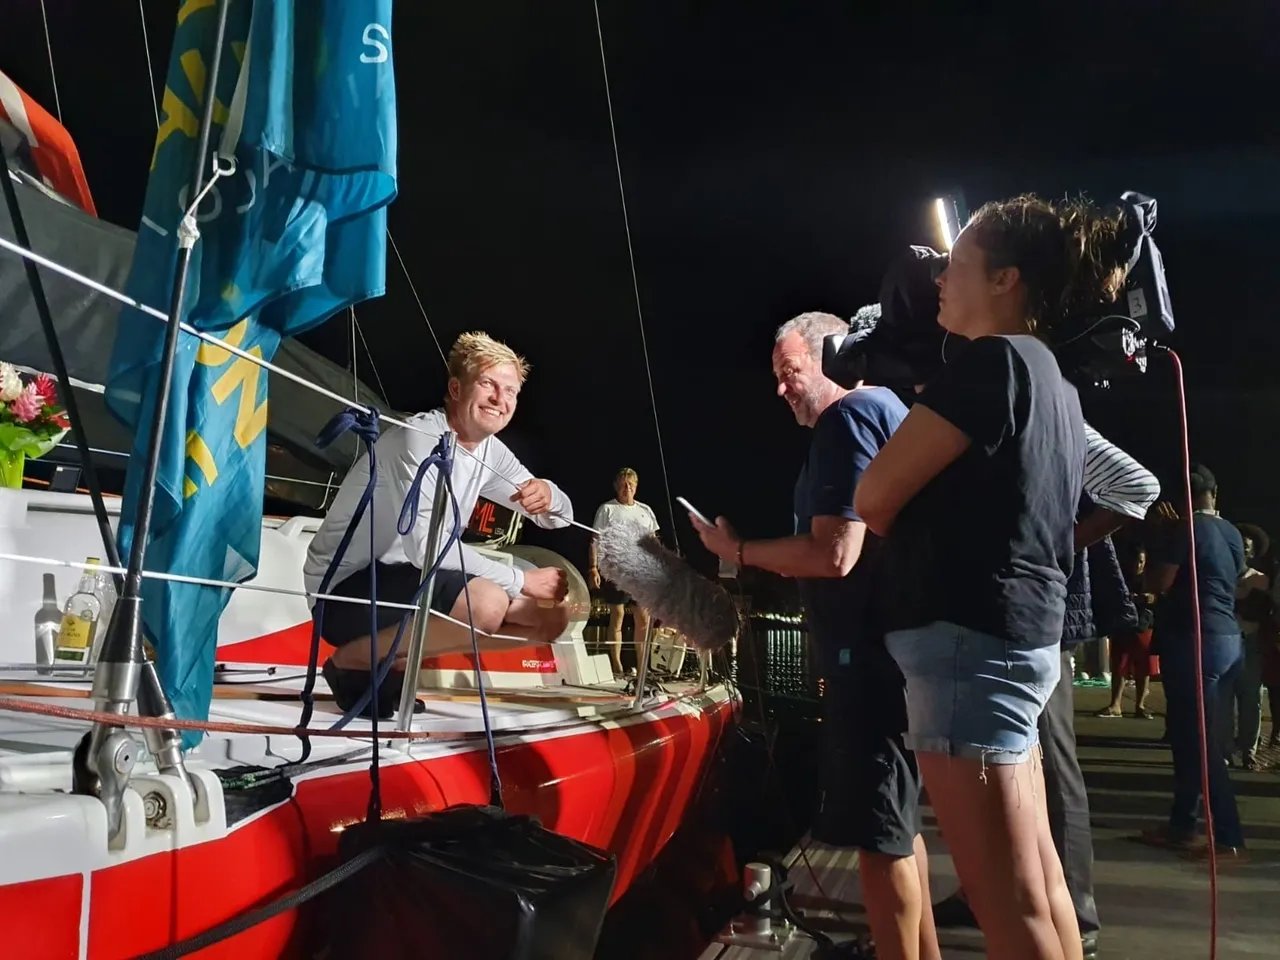 Route du Rhum - Oliver Heer bei seiner Ankunft in Guadeloupe